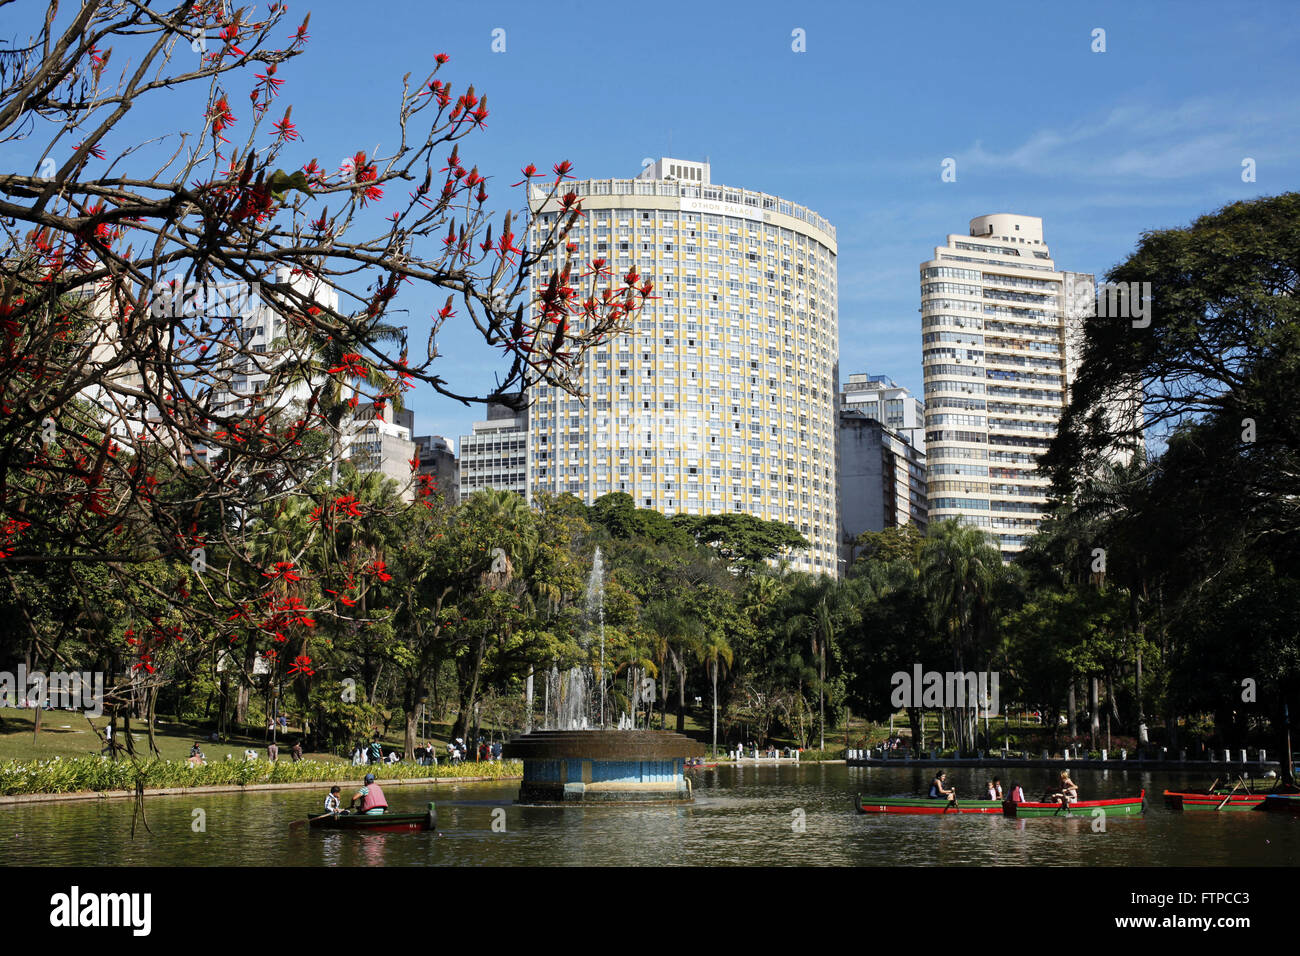 Boats in the lagoon of Americo Rene Giannetti Municipal Park in downtown Belo Horizonte - MG Stock Photo